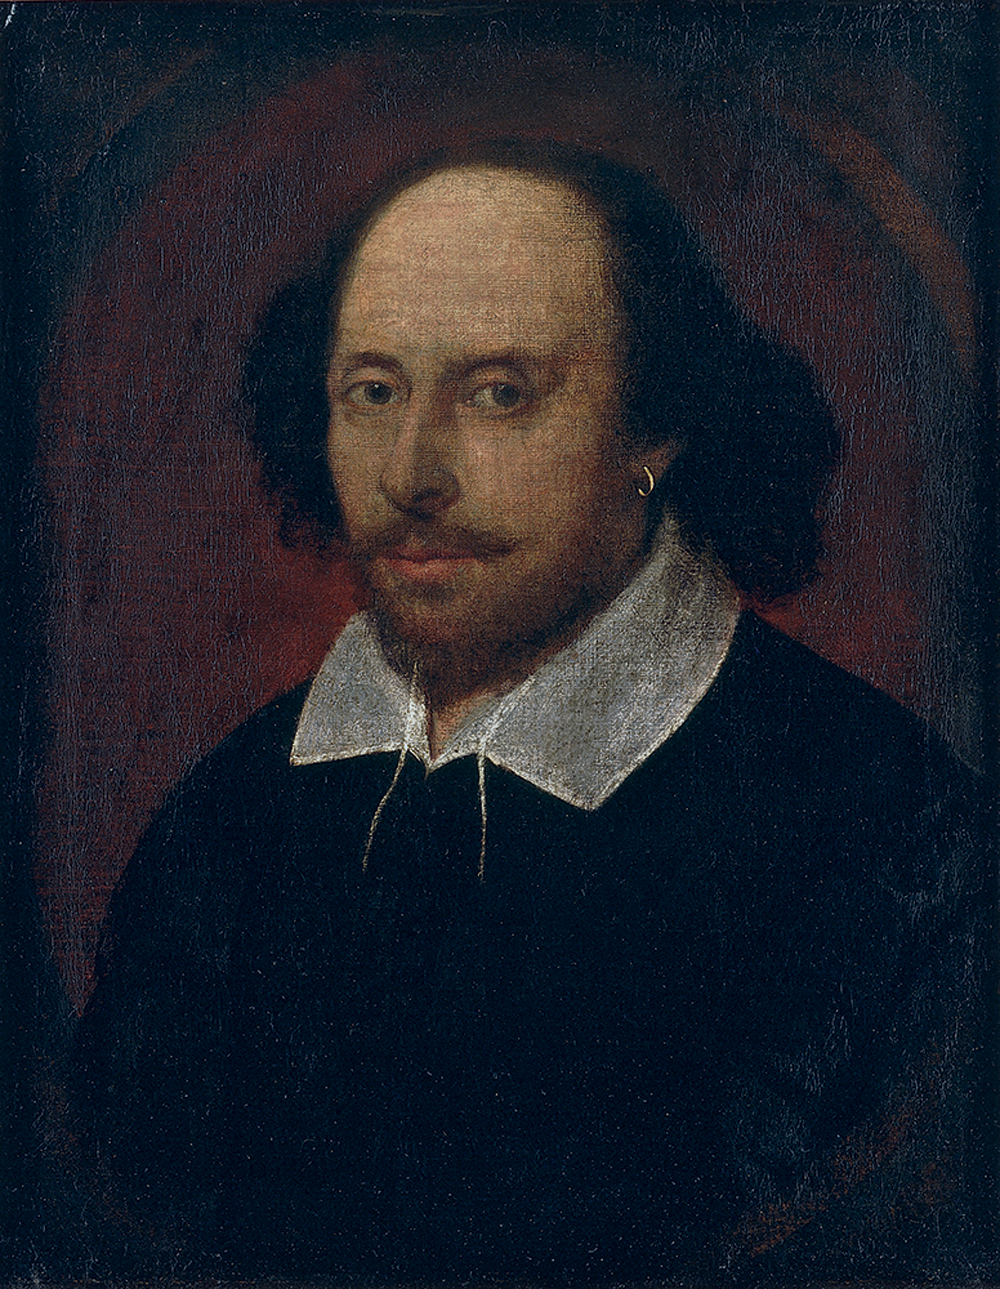 William Shakespeare by John Taylor (c. 1610)